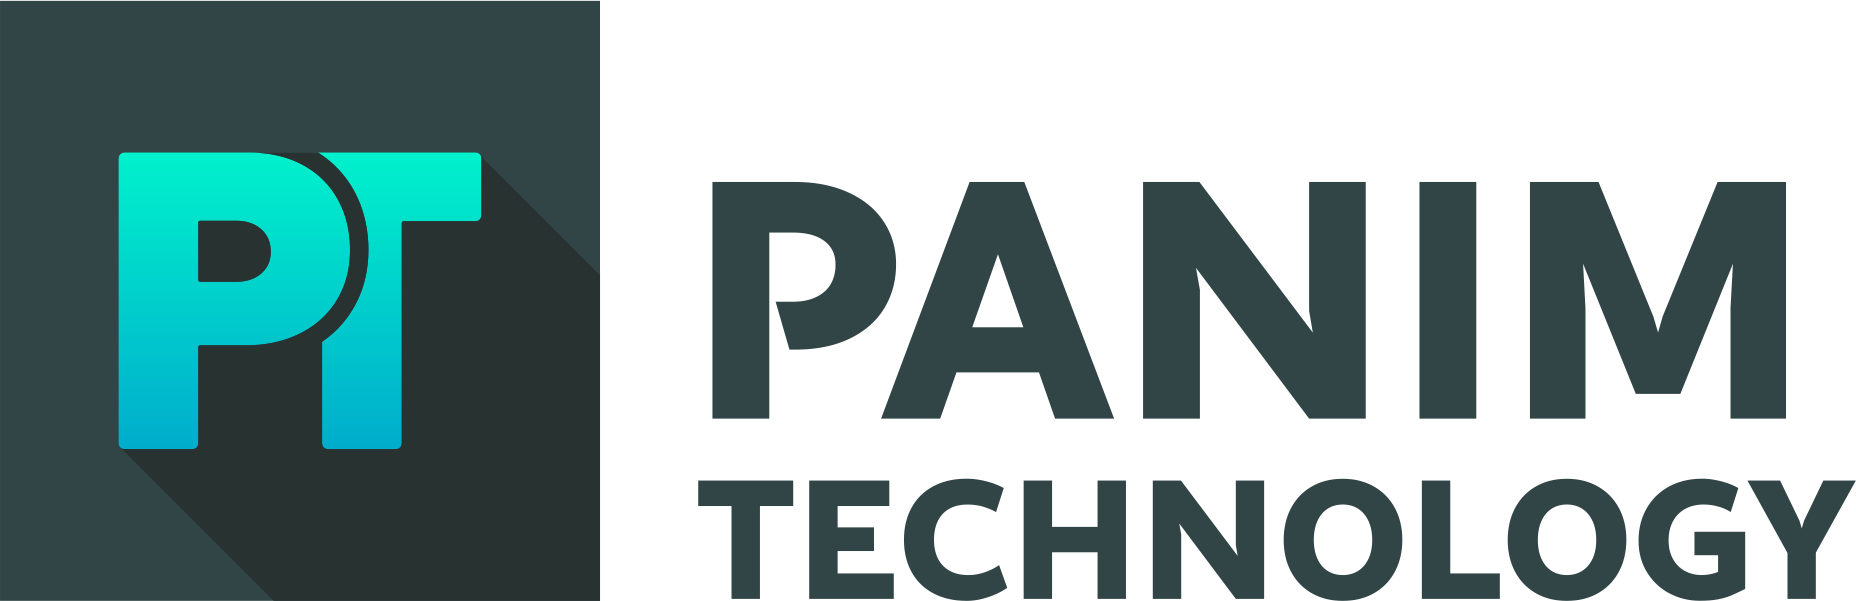 Panim Technology profile on Qualified.One